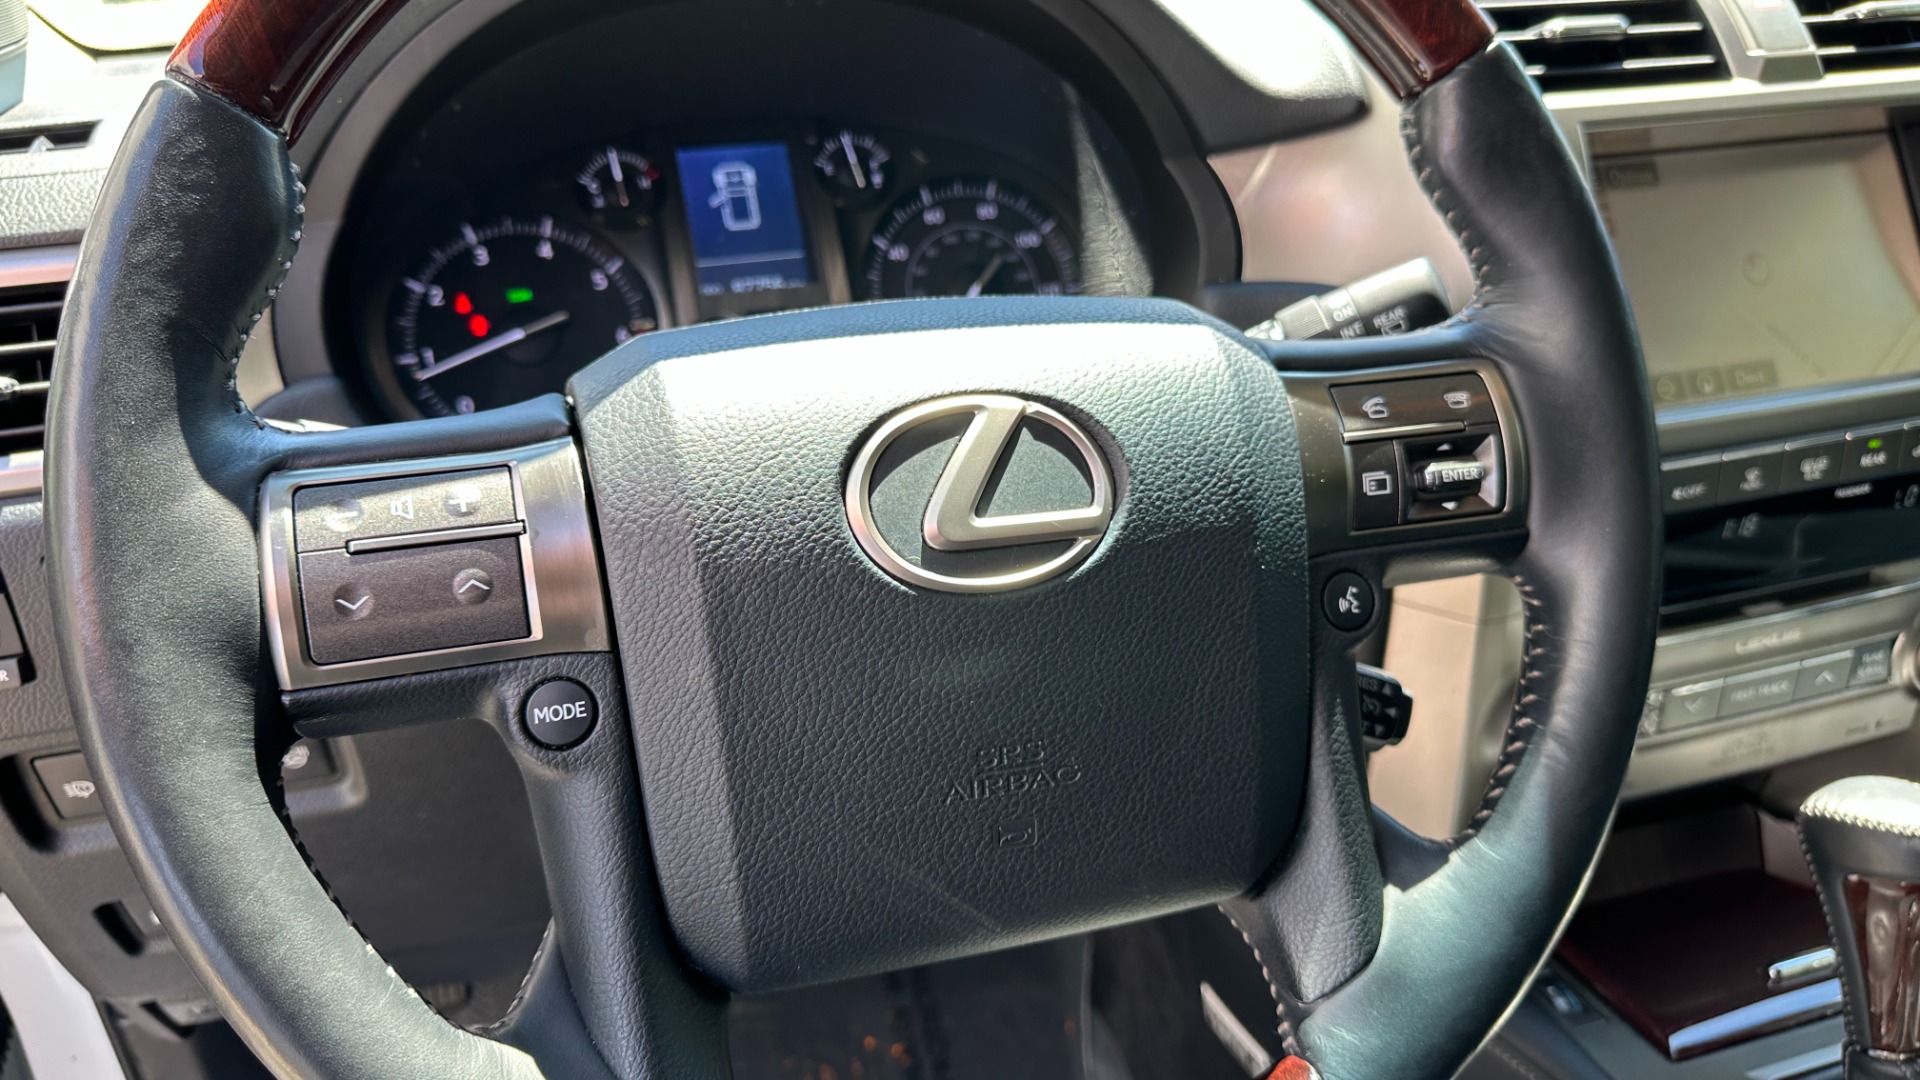 Used 2015 Lexus GX 460 LUXURY / MARK LEVINSON / ADJUSTABLE SUSPENSION / TOW HITCH / 3RD ROW for sale Sold at Formula Imports in Charlotte NC 28227 16